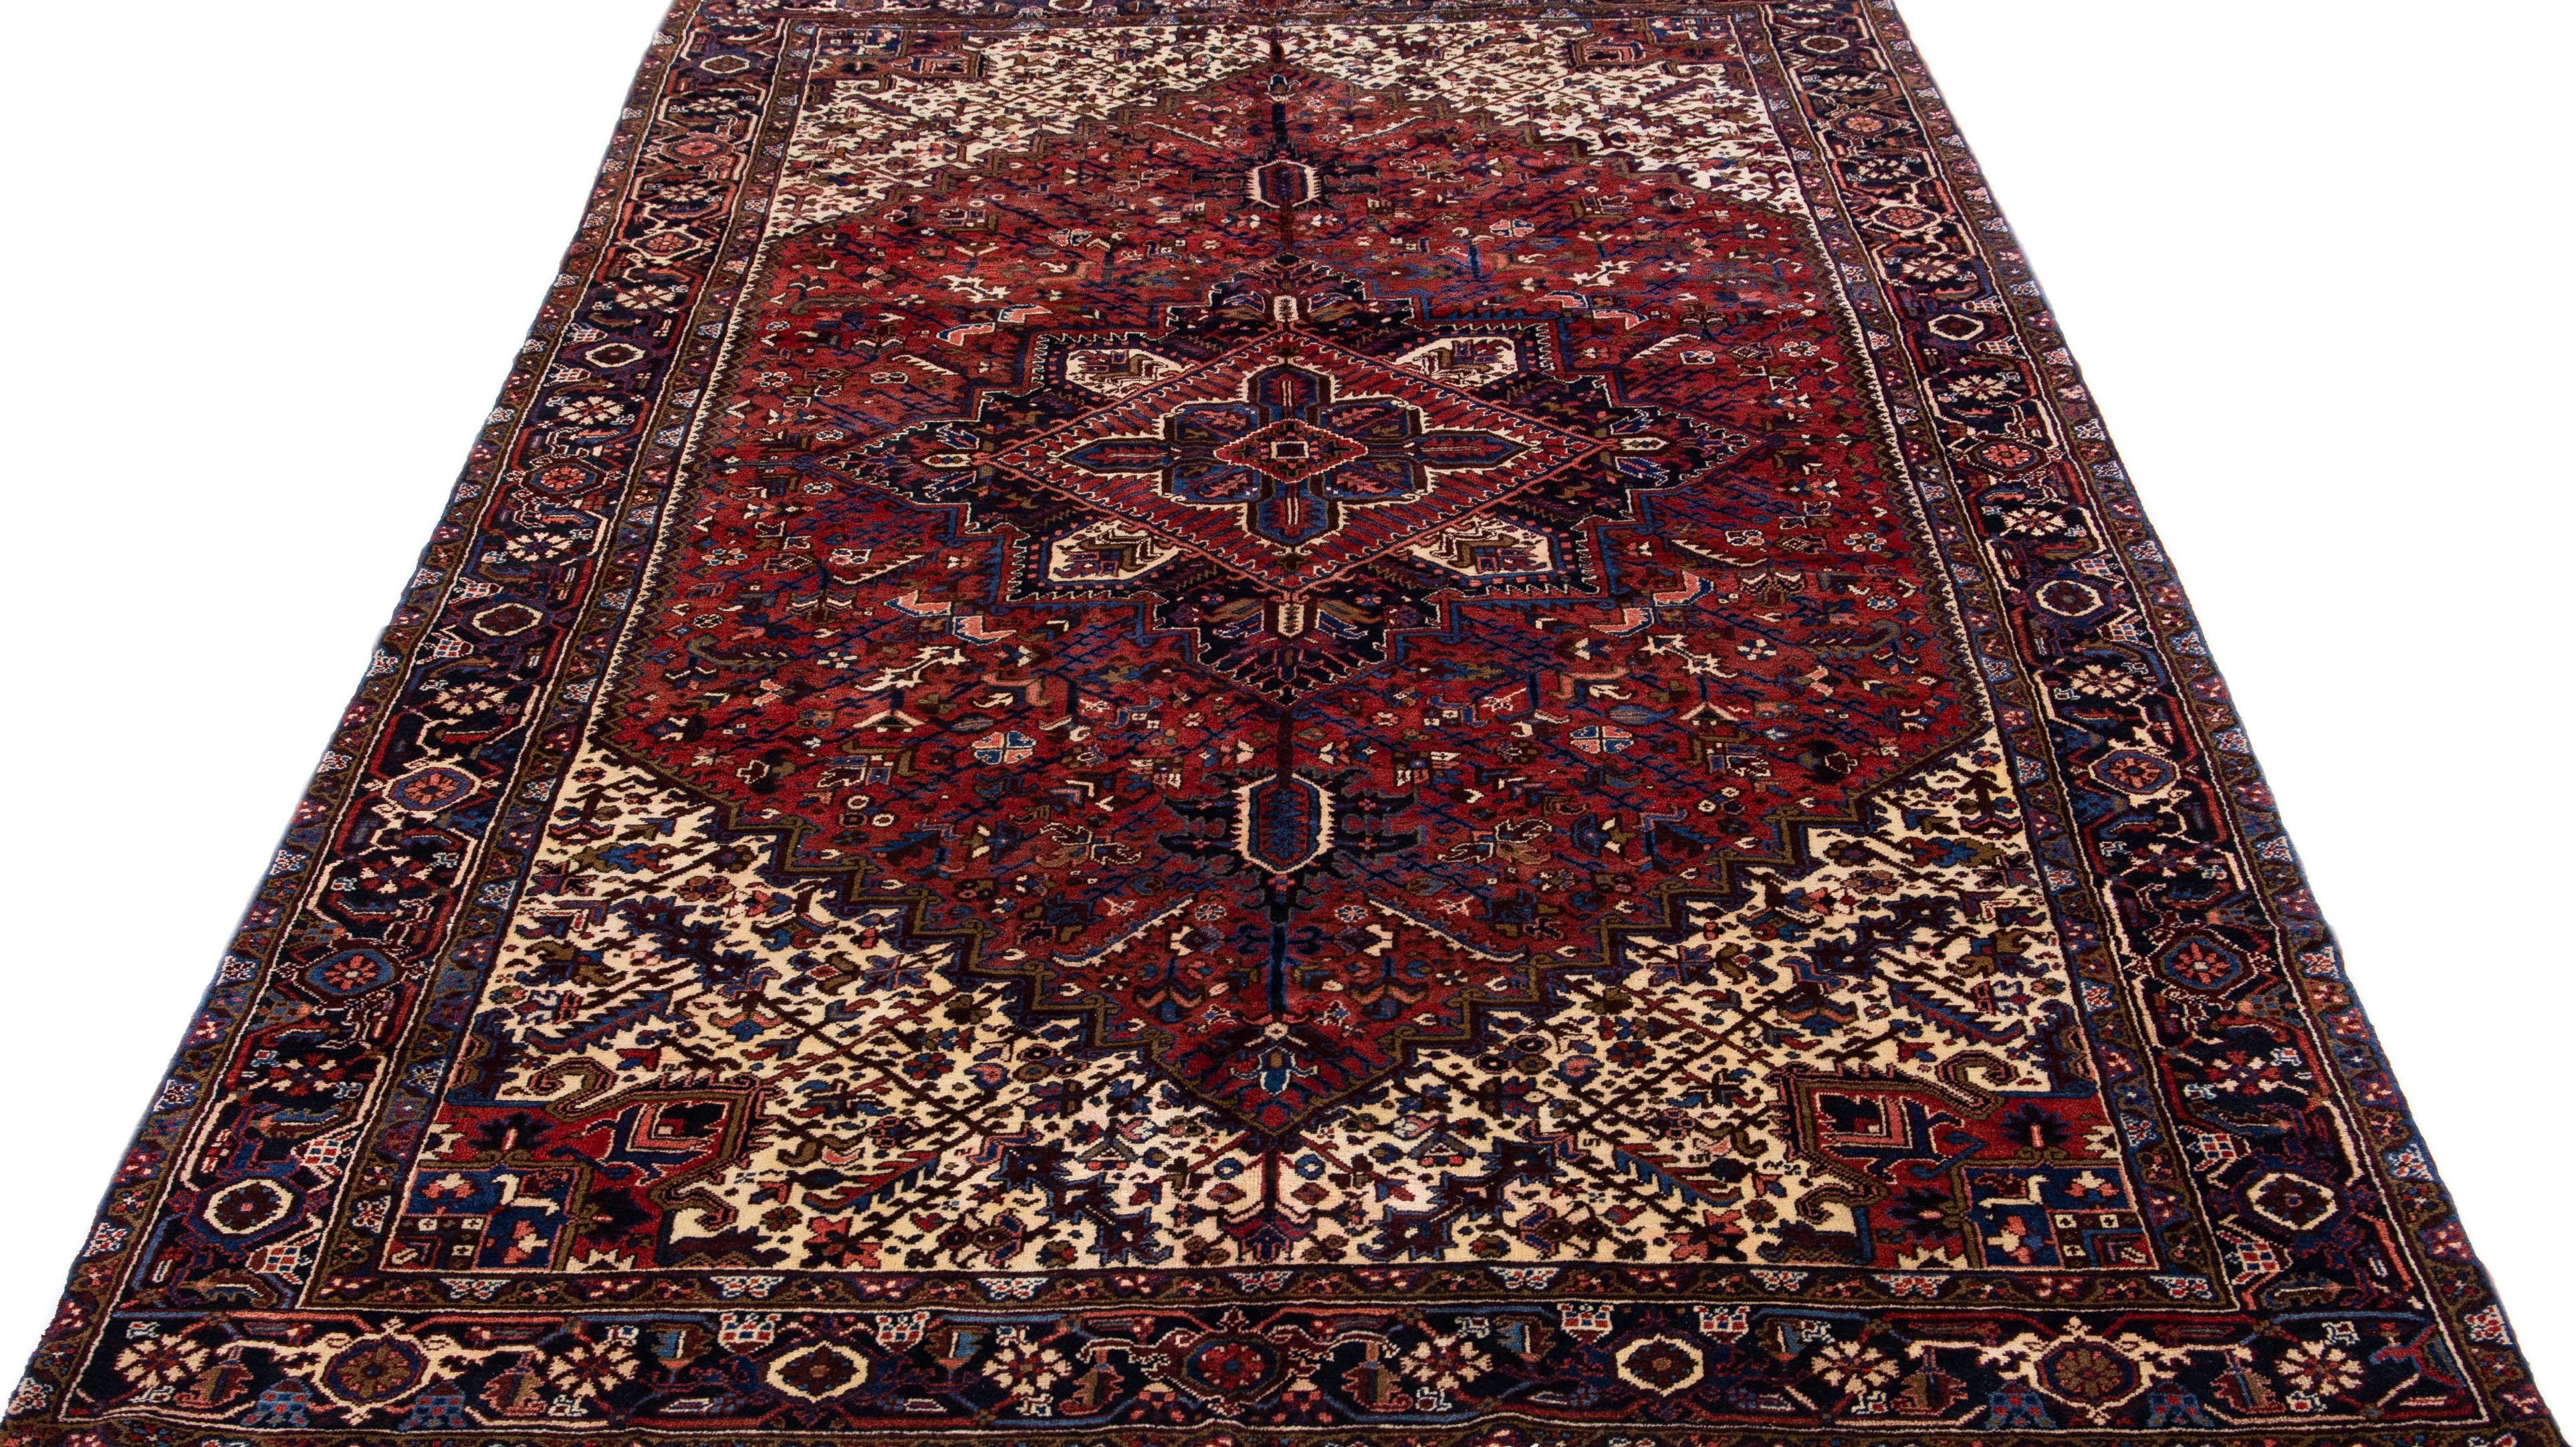 Beautiful antique Heriz hand-knotted wool rug with a red color field. This Persian rug has a navy blue frame and multicolor accents in a gorgeous all-over medallion floral design.

This rug measures: 8'9